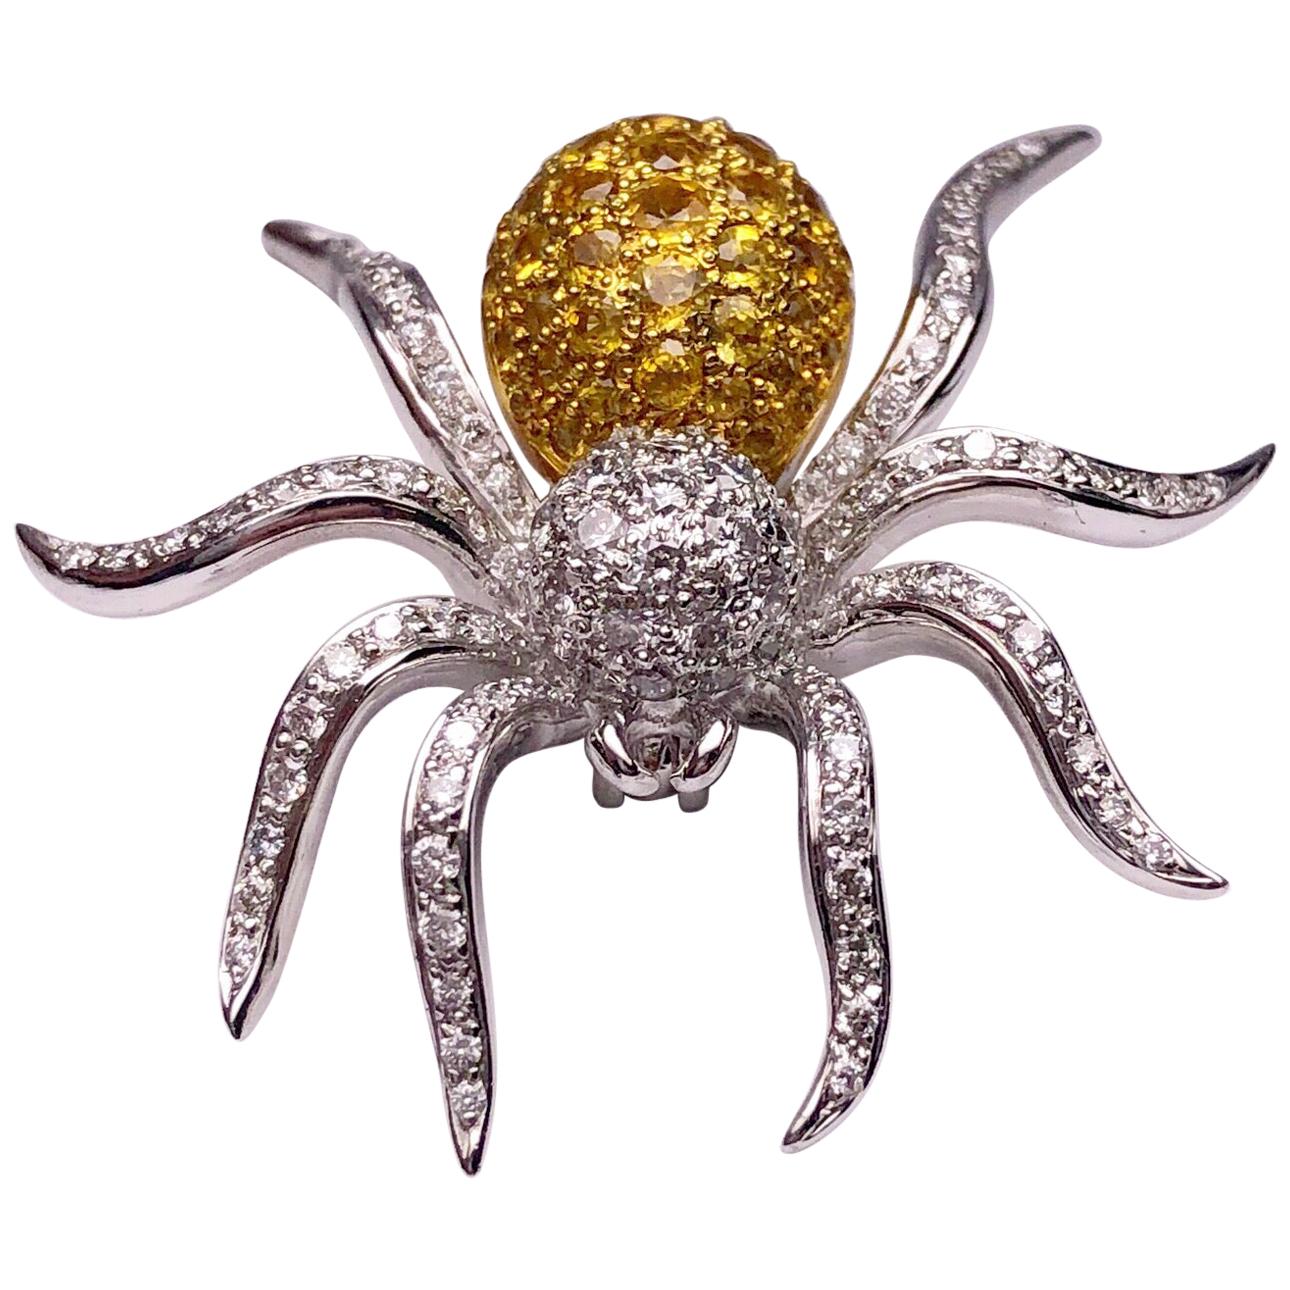 18 Karat WG Spider Brooch with 1.00Ct Diamonds and 1.97Ct Yellow Sapphires